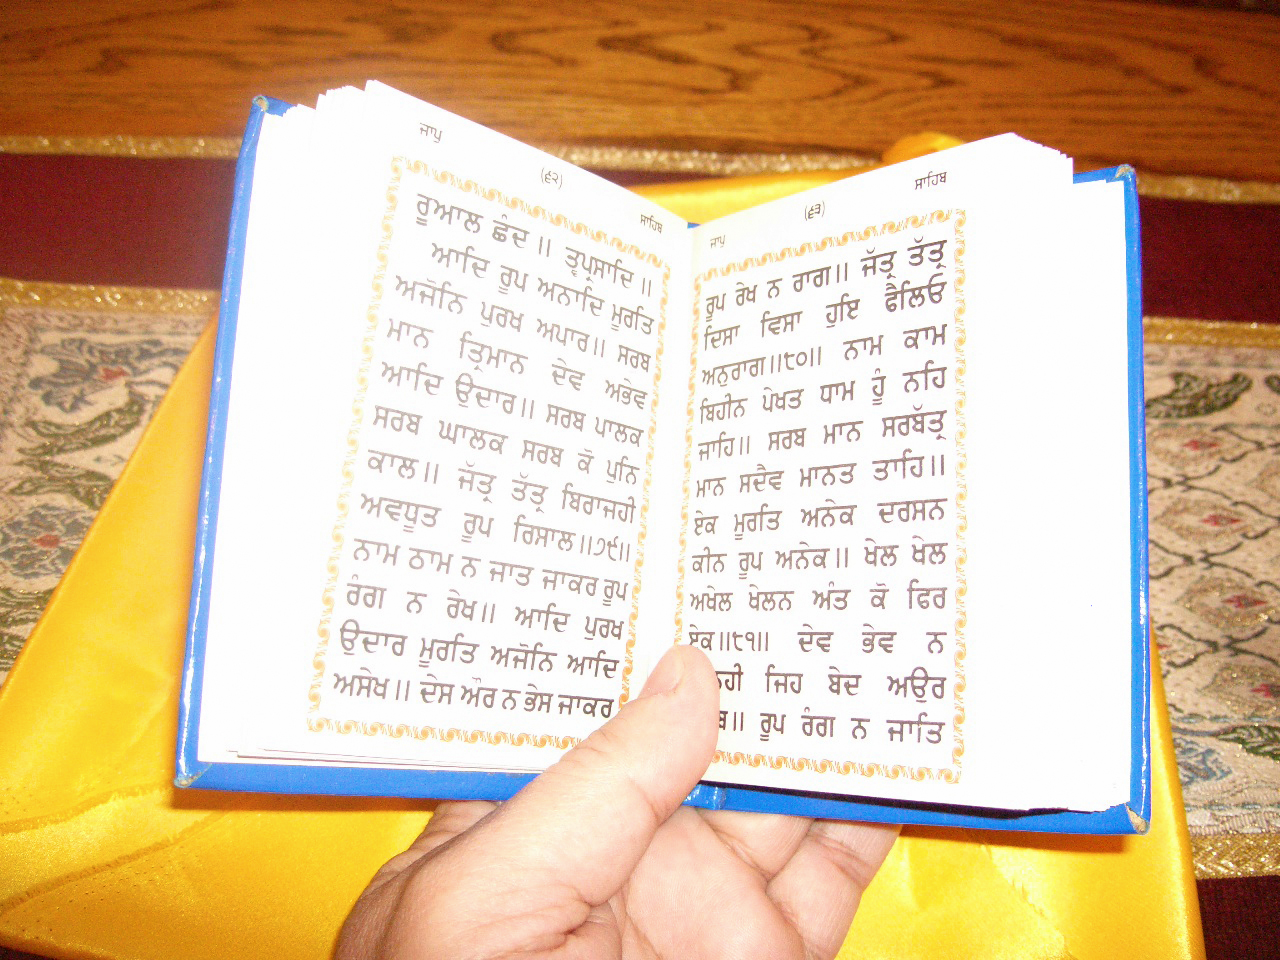 Collection of Stunning Full 4K Gurbani Images – Over 999 in Total